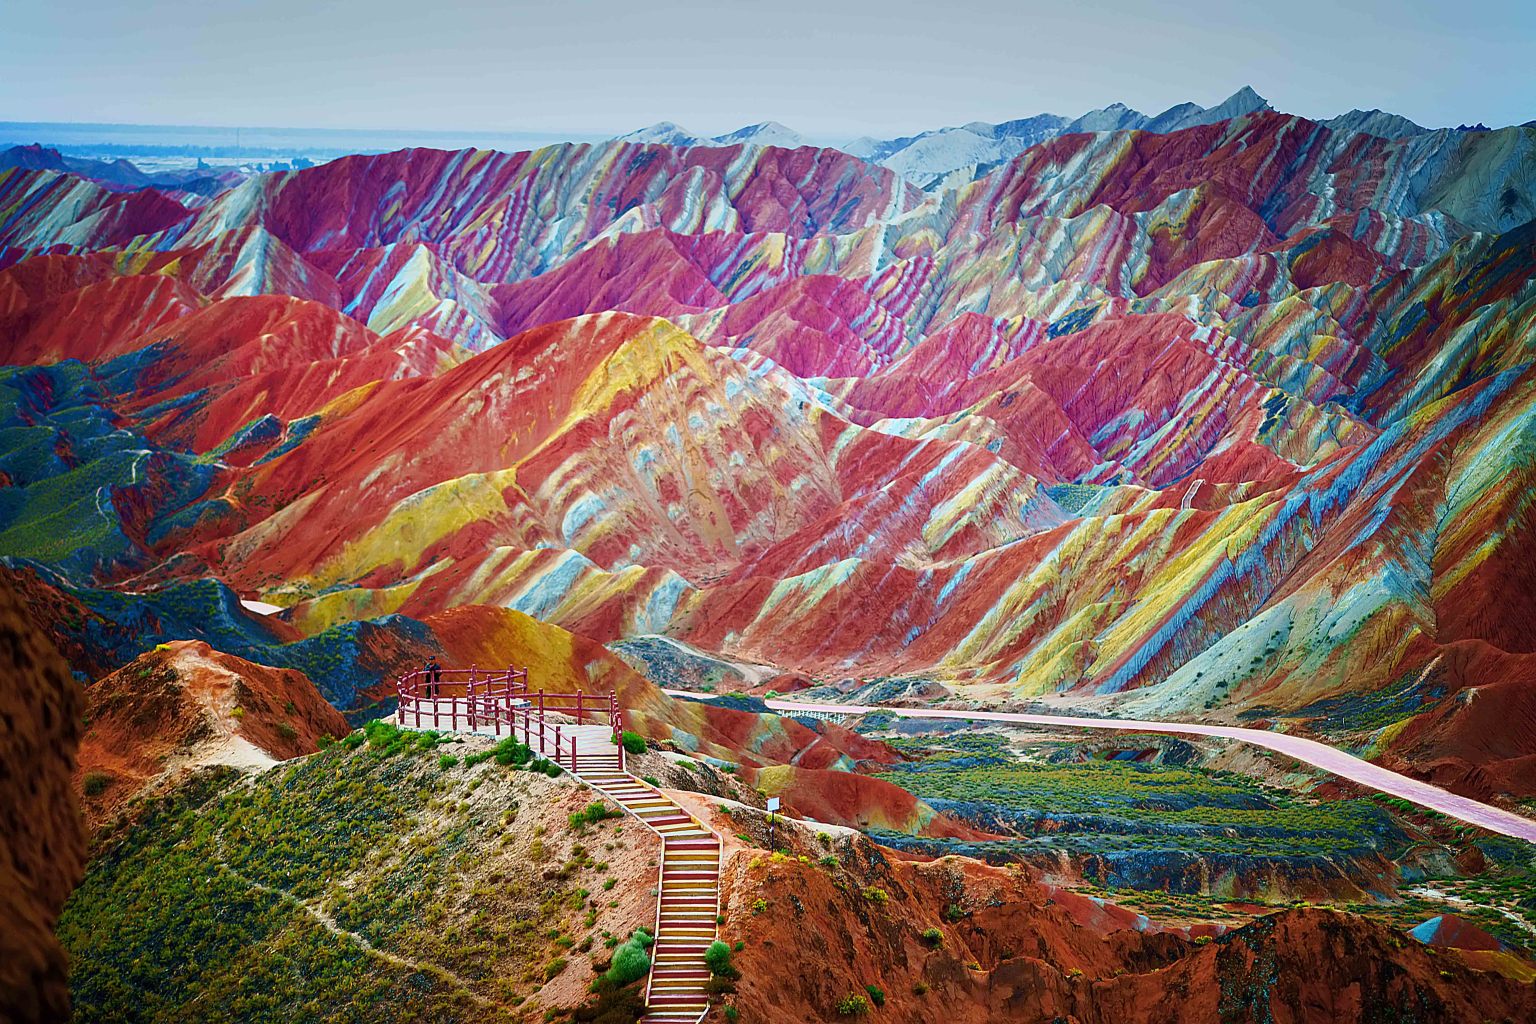 Rainbow Mountains In China's Danxia Landform Geological Park Are Very